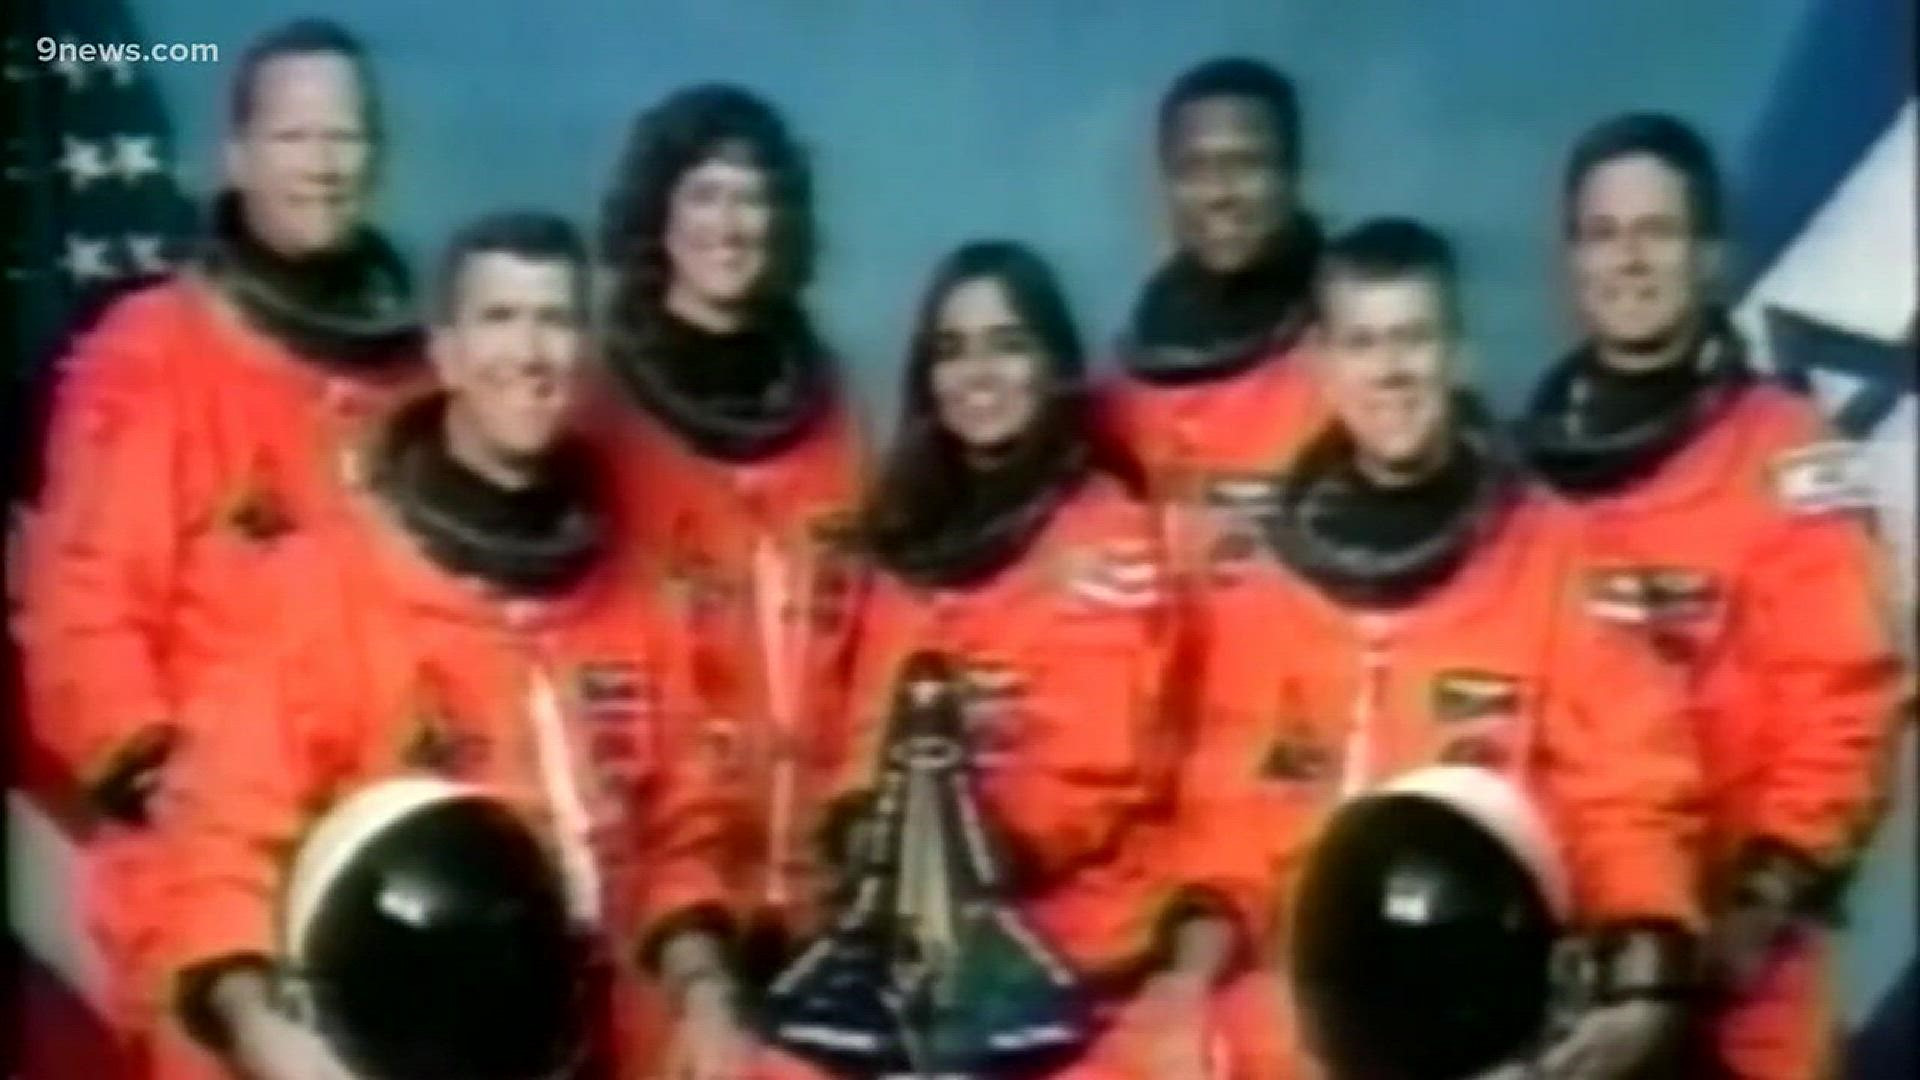 Kalpana Chawla was the first female of Indian origin to go to space. The event will also honor those killed in the 1986 Challenger disaster.